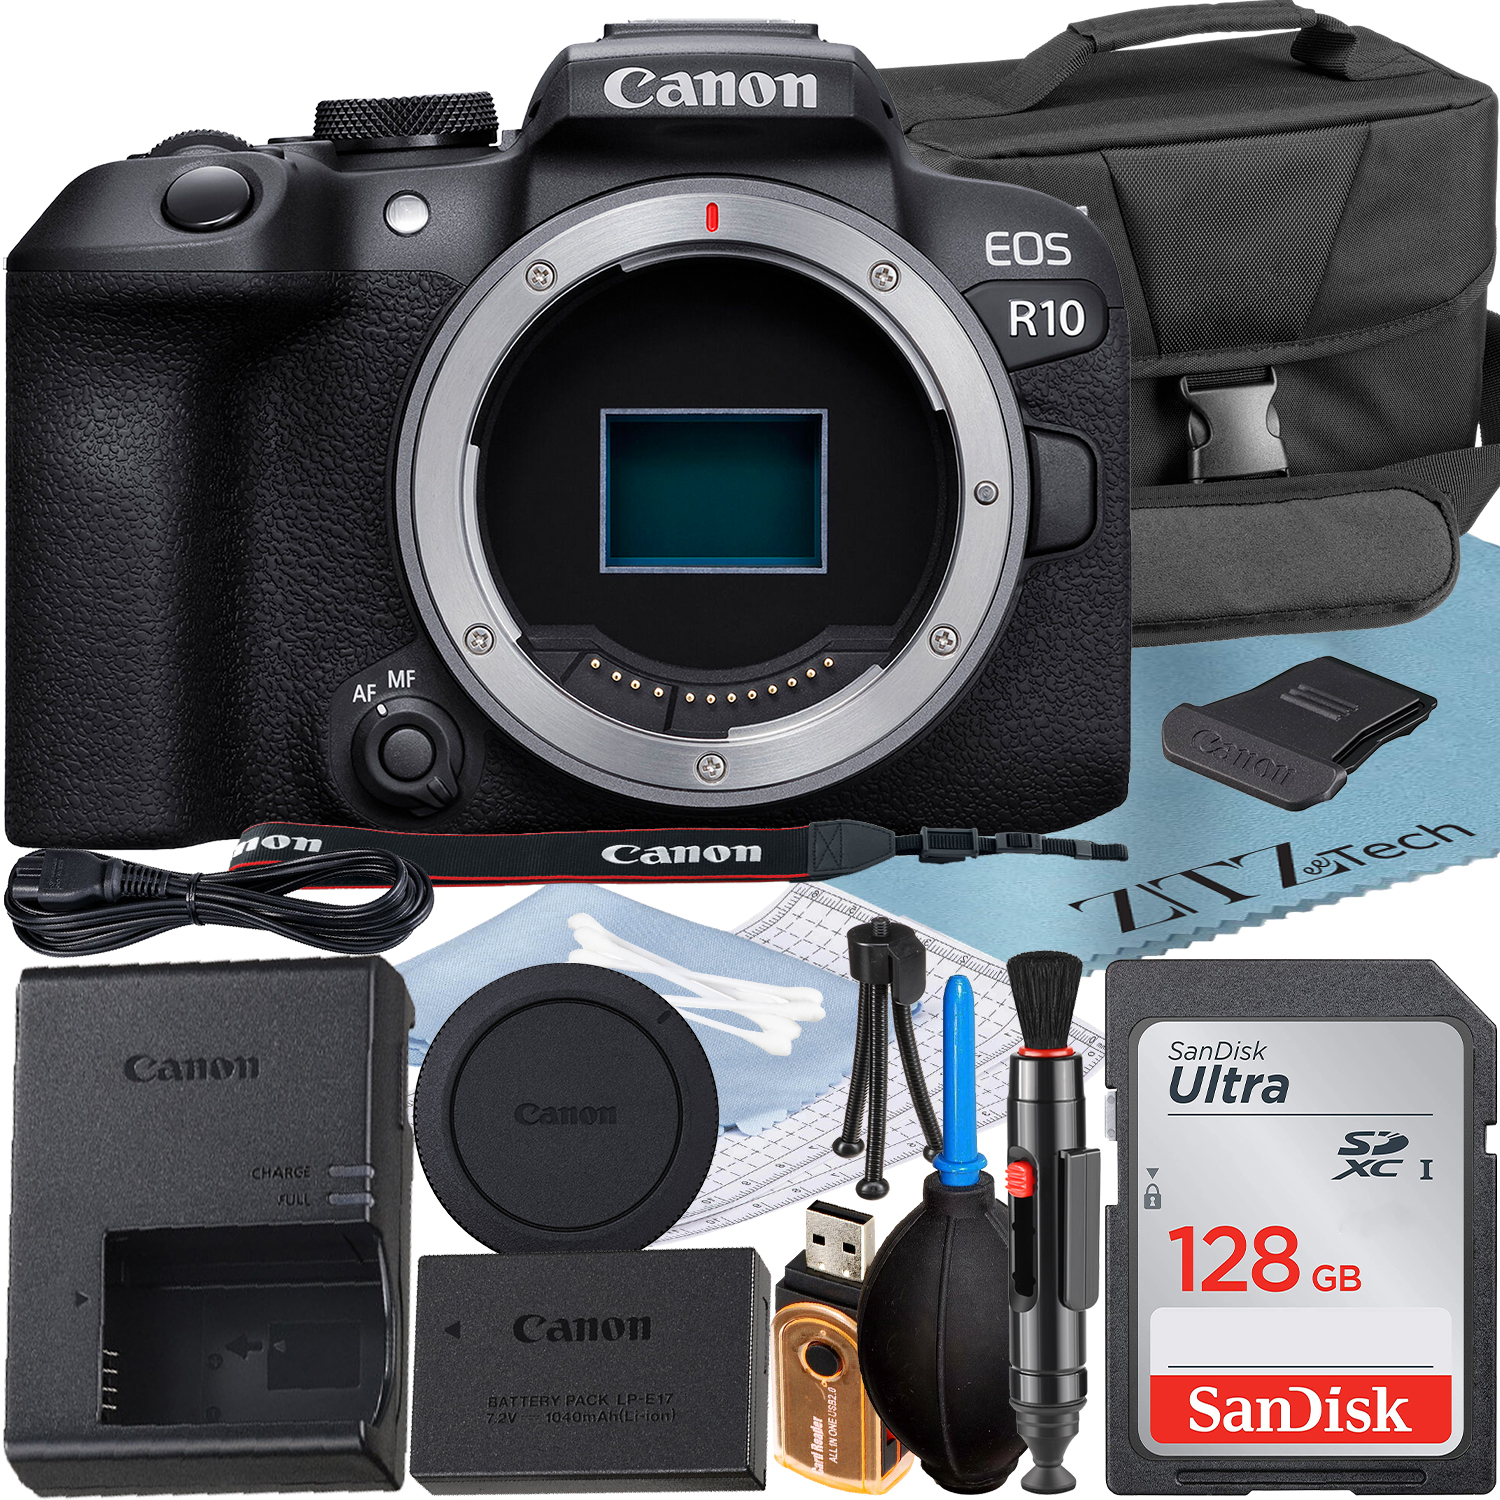 Canon EOS R10 Mirrorless Camera (Body) with 4K Video + SanDisk 128GB Memory Card + Case + ZeeTech Accessory Bundle